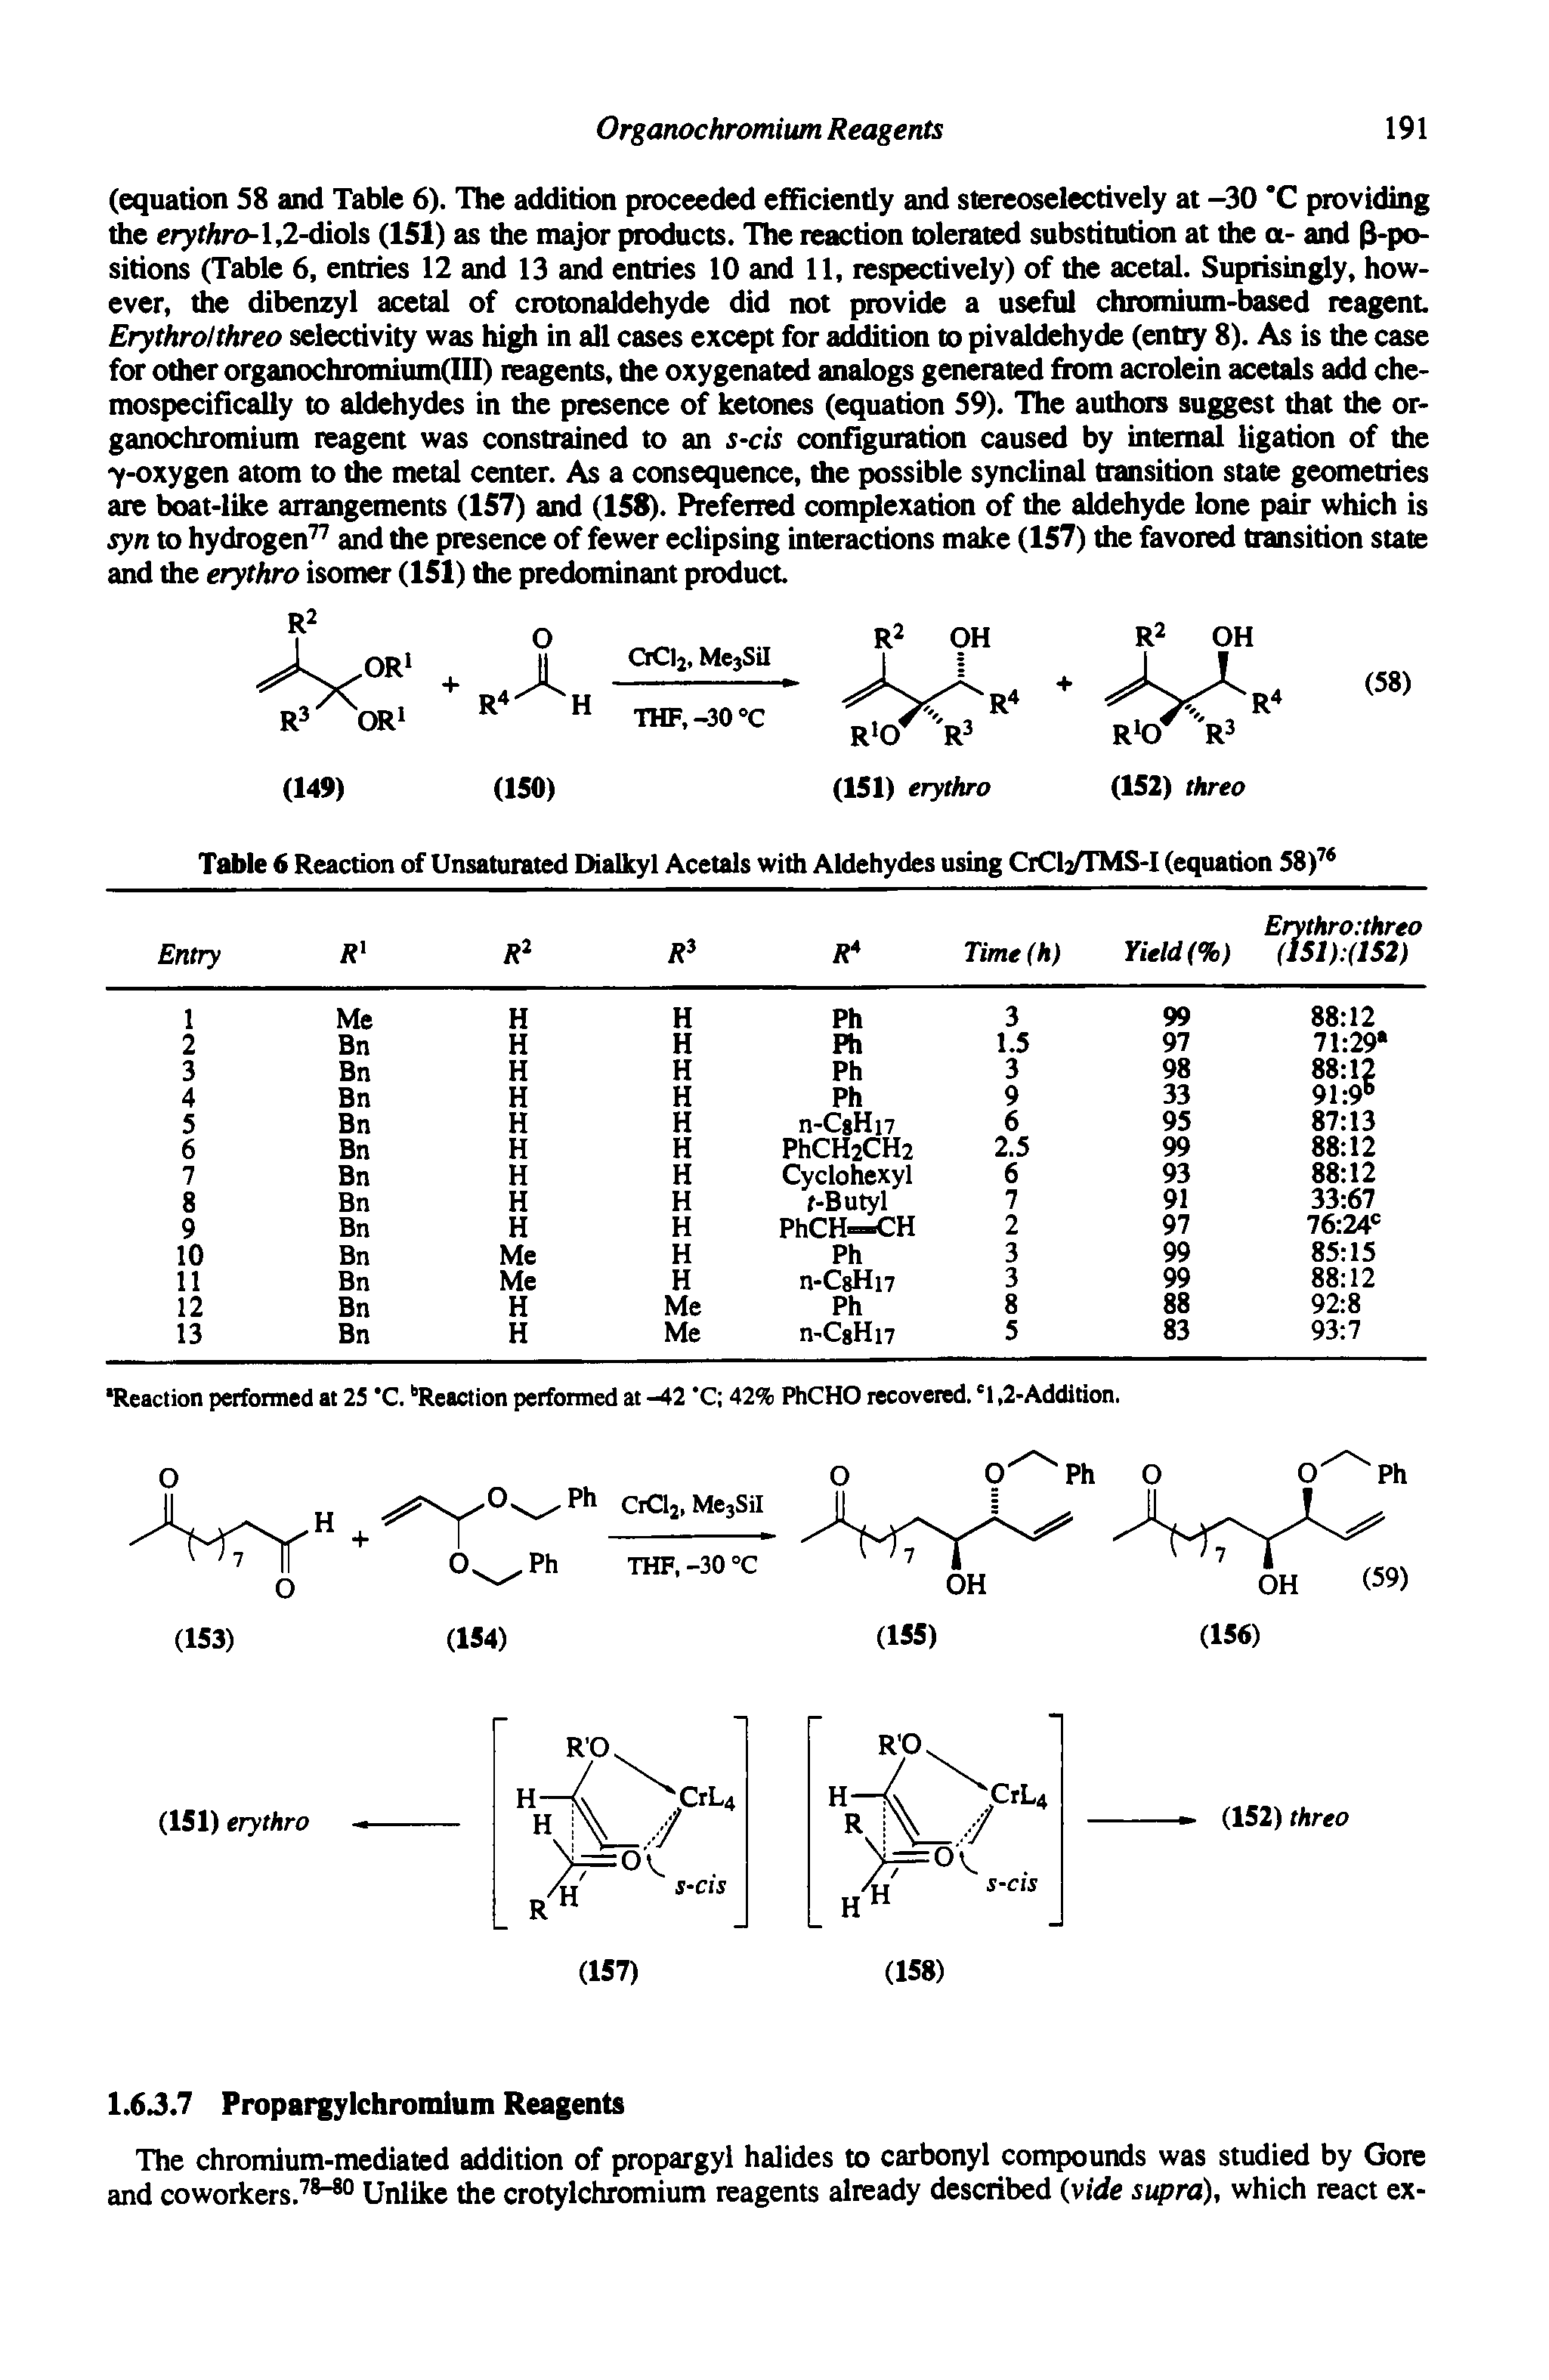 Table 6 Reaction of Unsaturated Dialkyl Acetals with Aldehydes using CrCl2 S-I (equation 58) ...